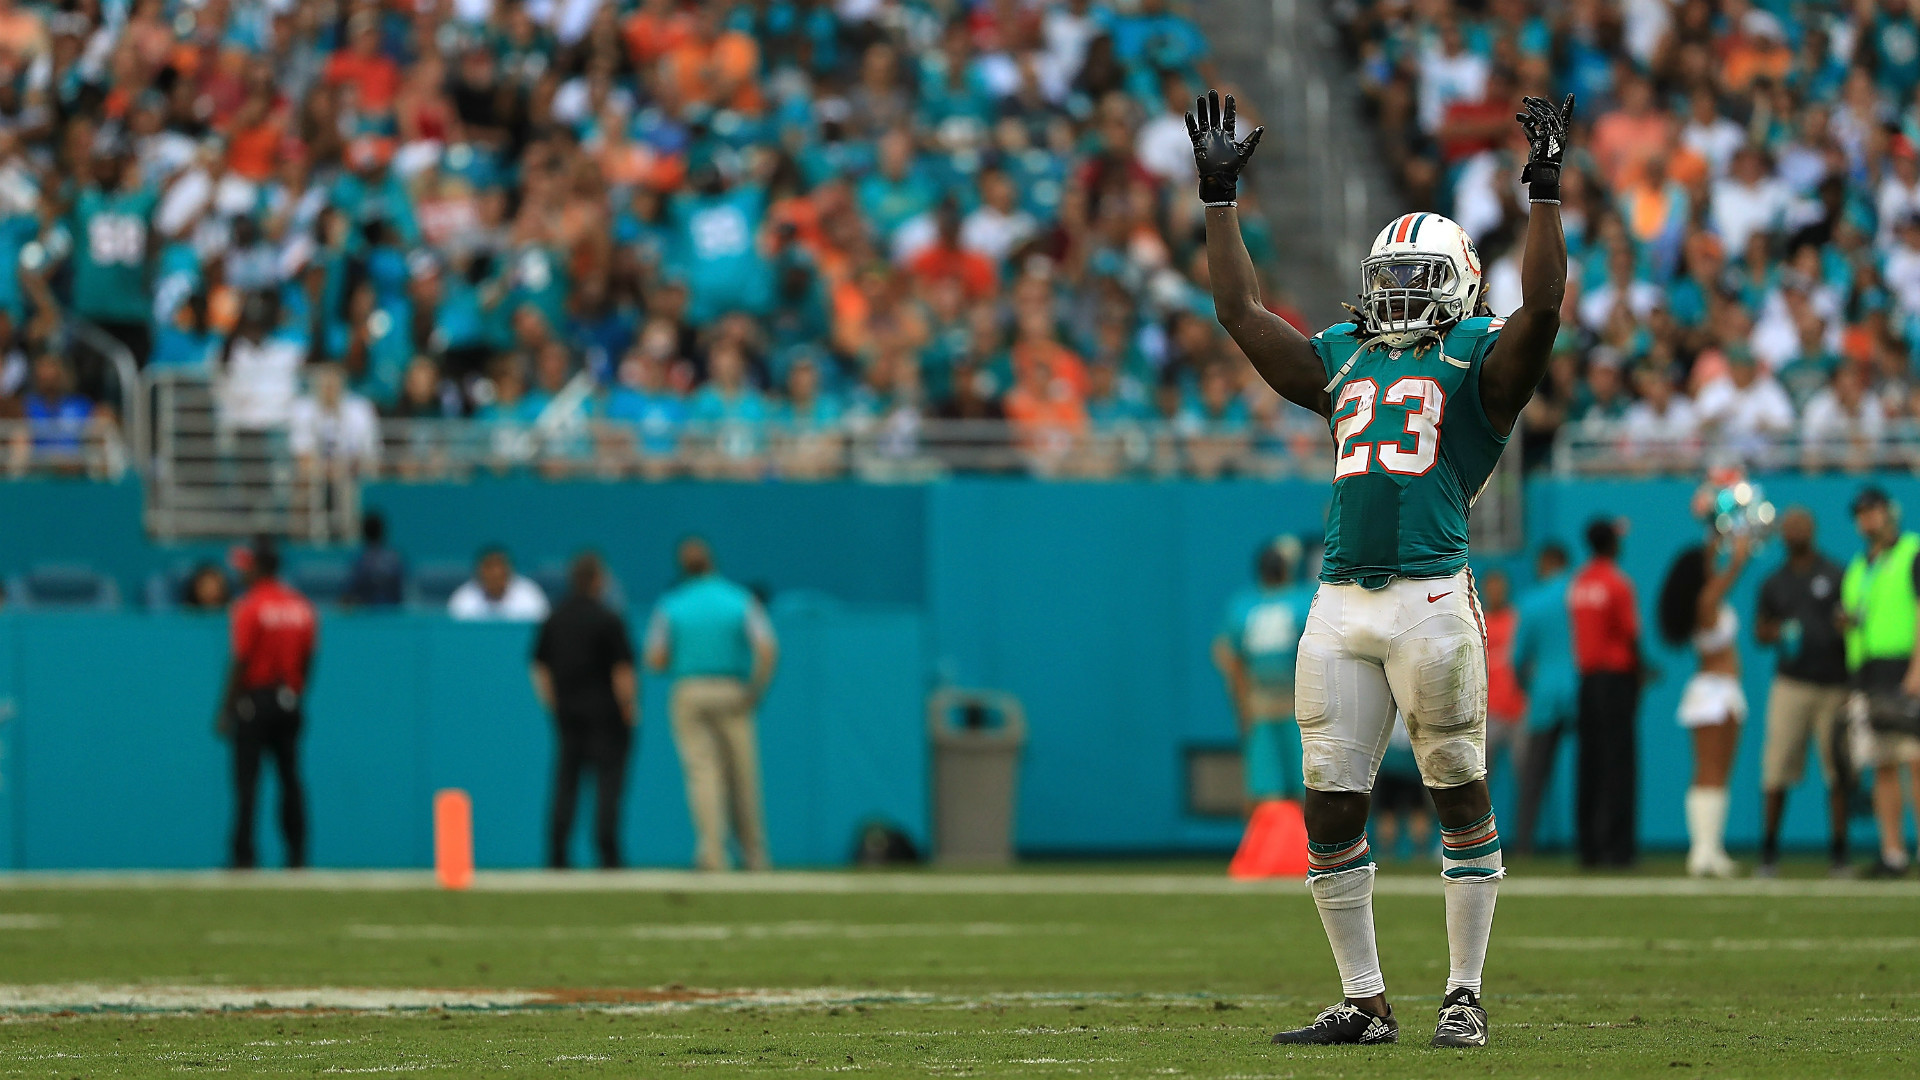 1920x1080 Jay Ajayi says Miami Dolphins' play-off qualification highlight of 2016